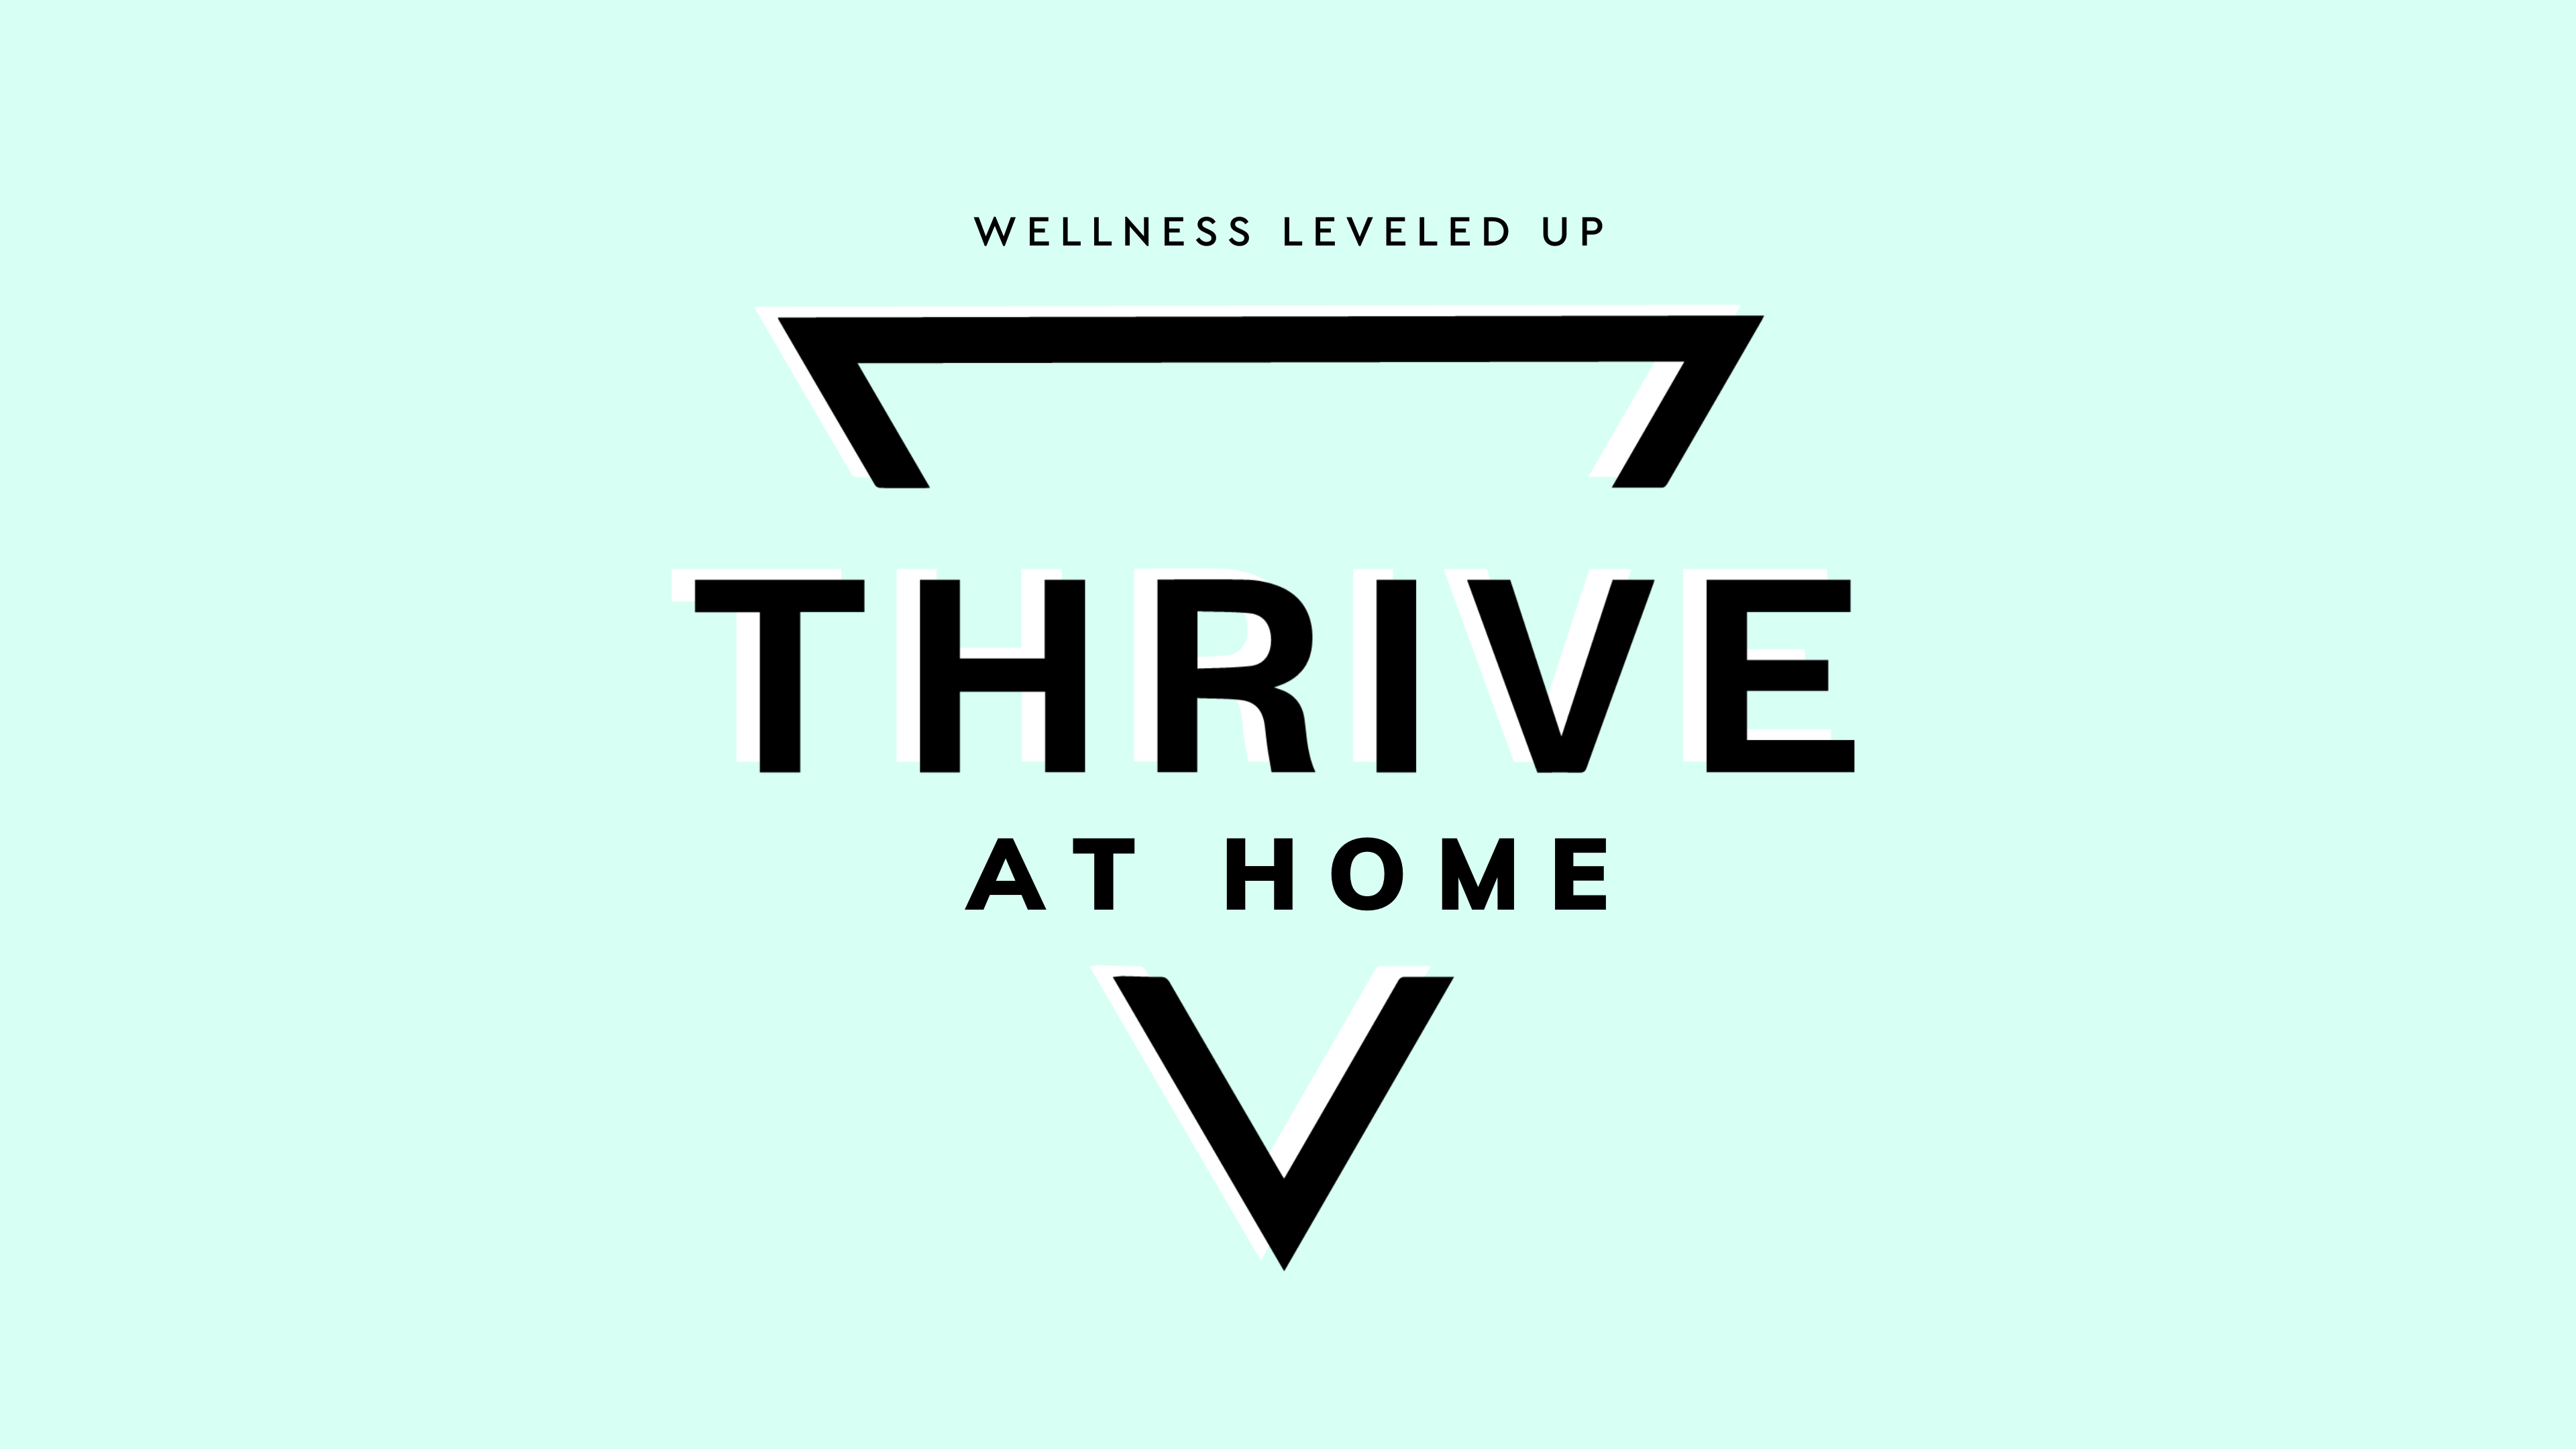 Thrive Wellness Leveled Up with Eola Hills Wine Cellars and Yoga+Beer and Barre3